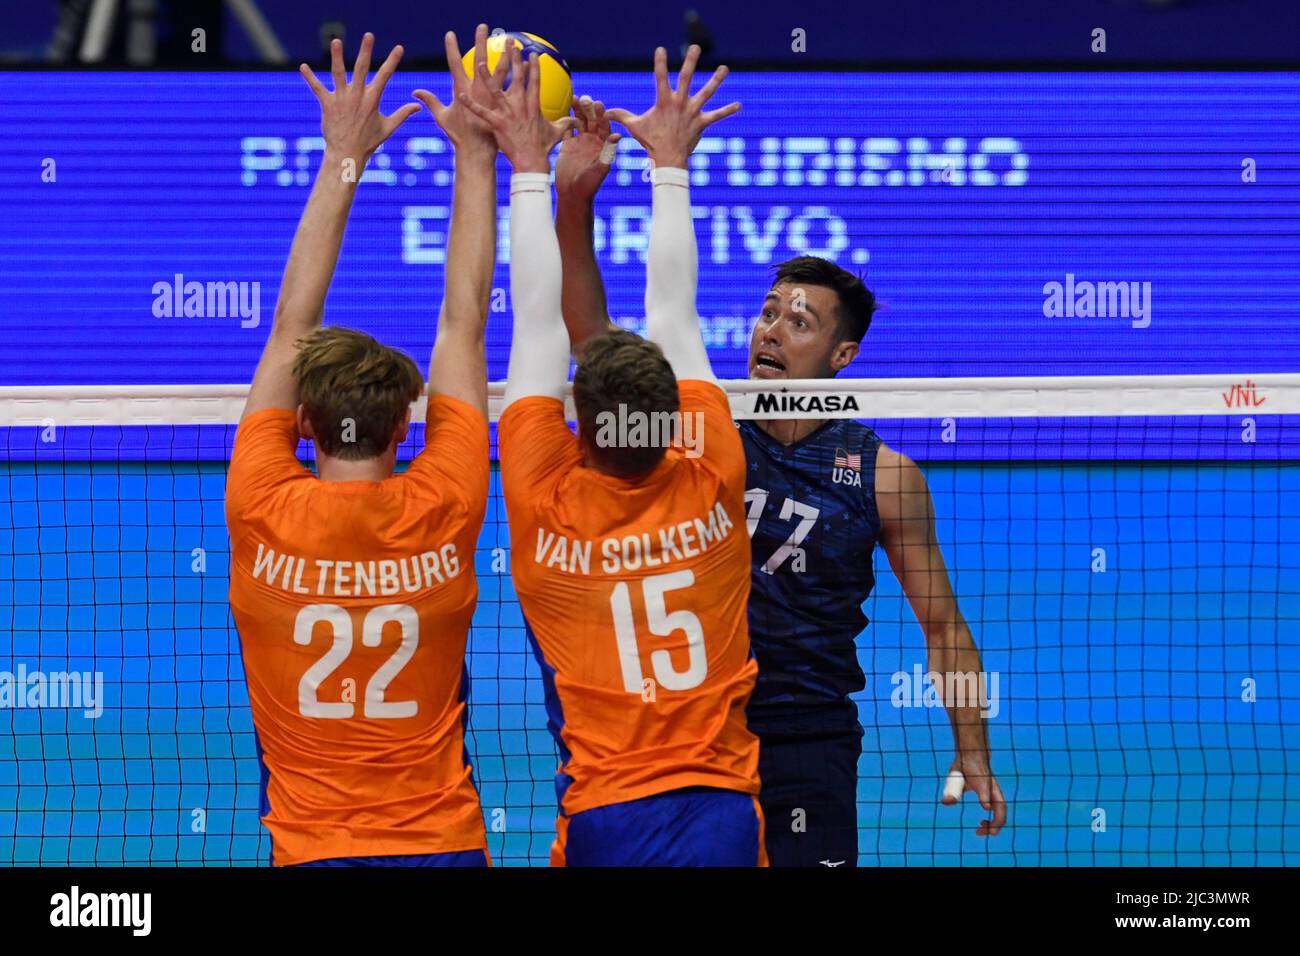 volleyball nations league 2022 live